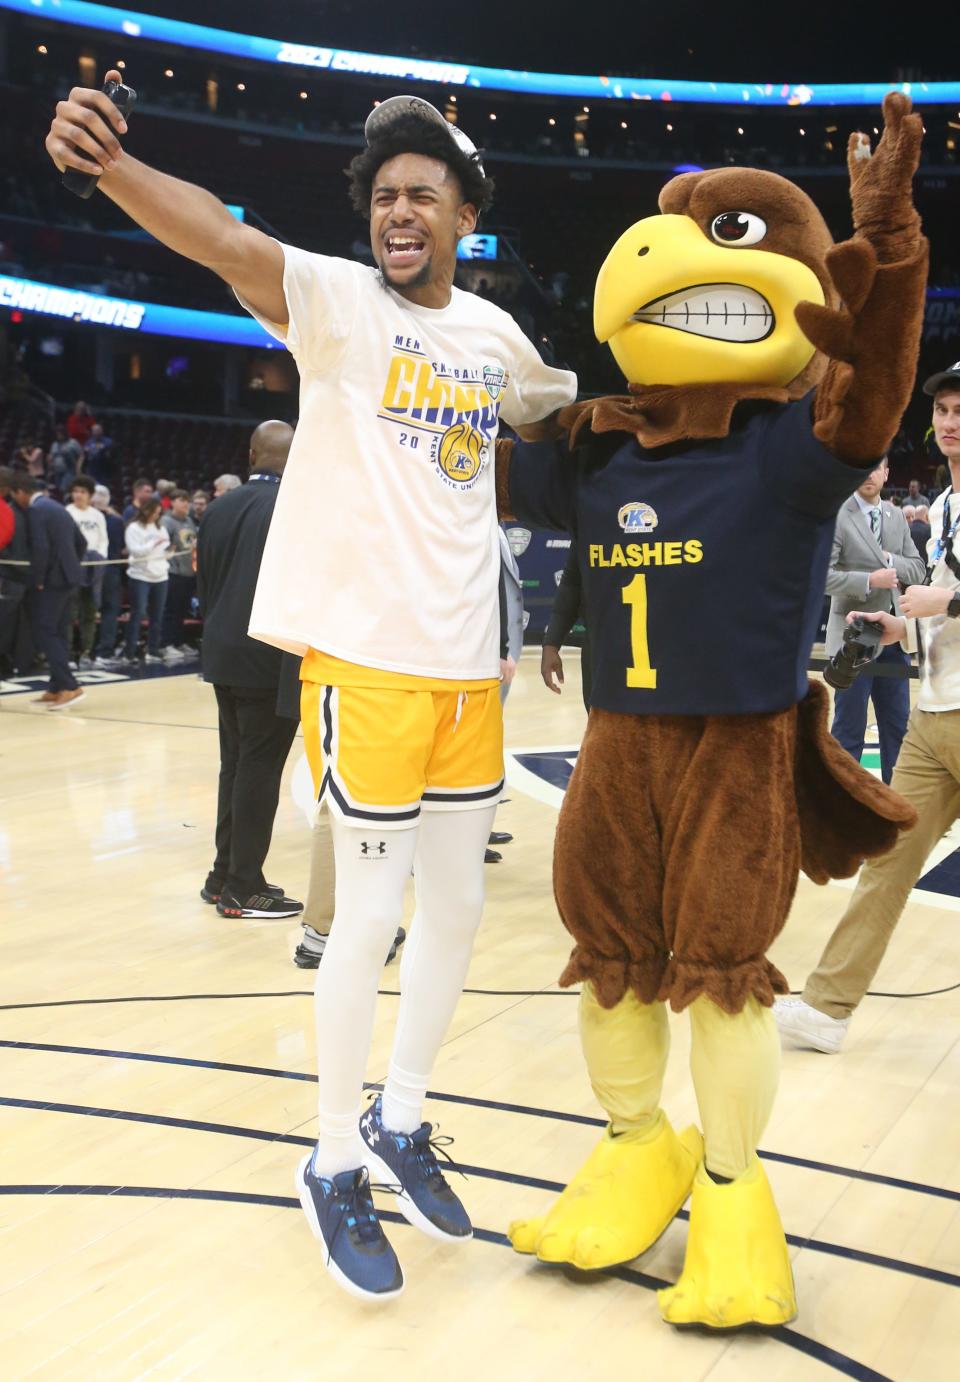 Kent State's VonCameron Davis celebrates the Golden Flashes' win over Toledo with mascot Flash after the MAC championship game Saturday, March 11, 2023 in Cleveland.